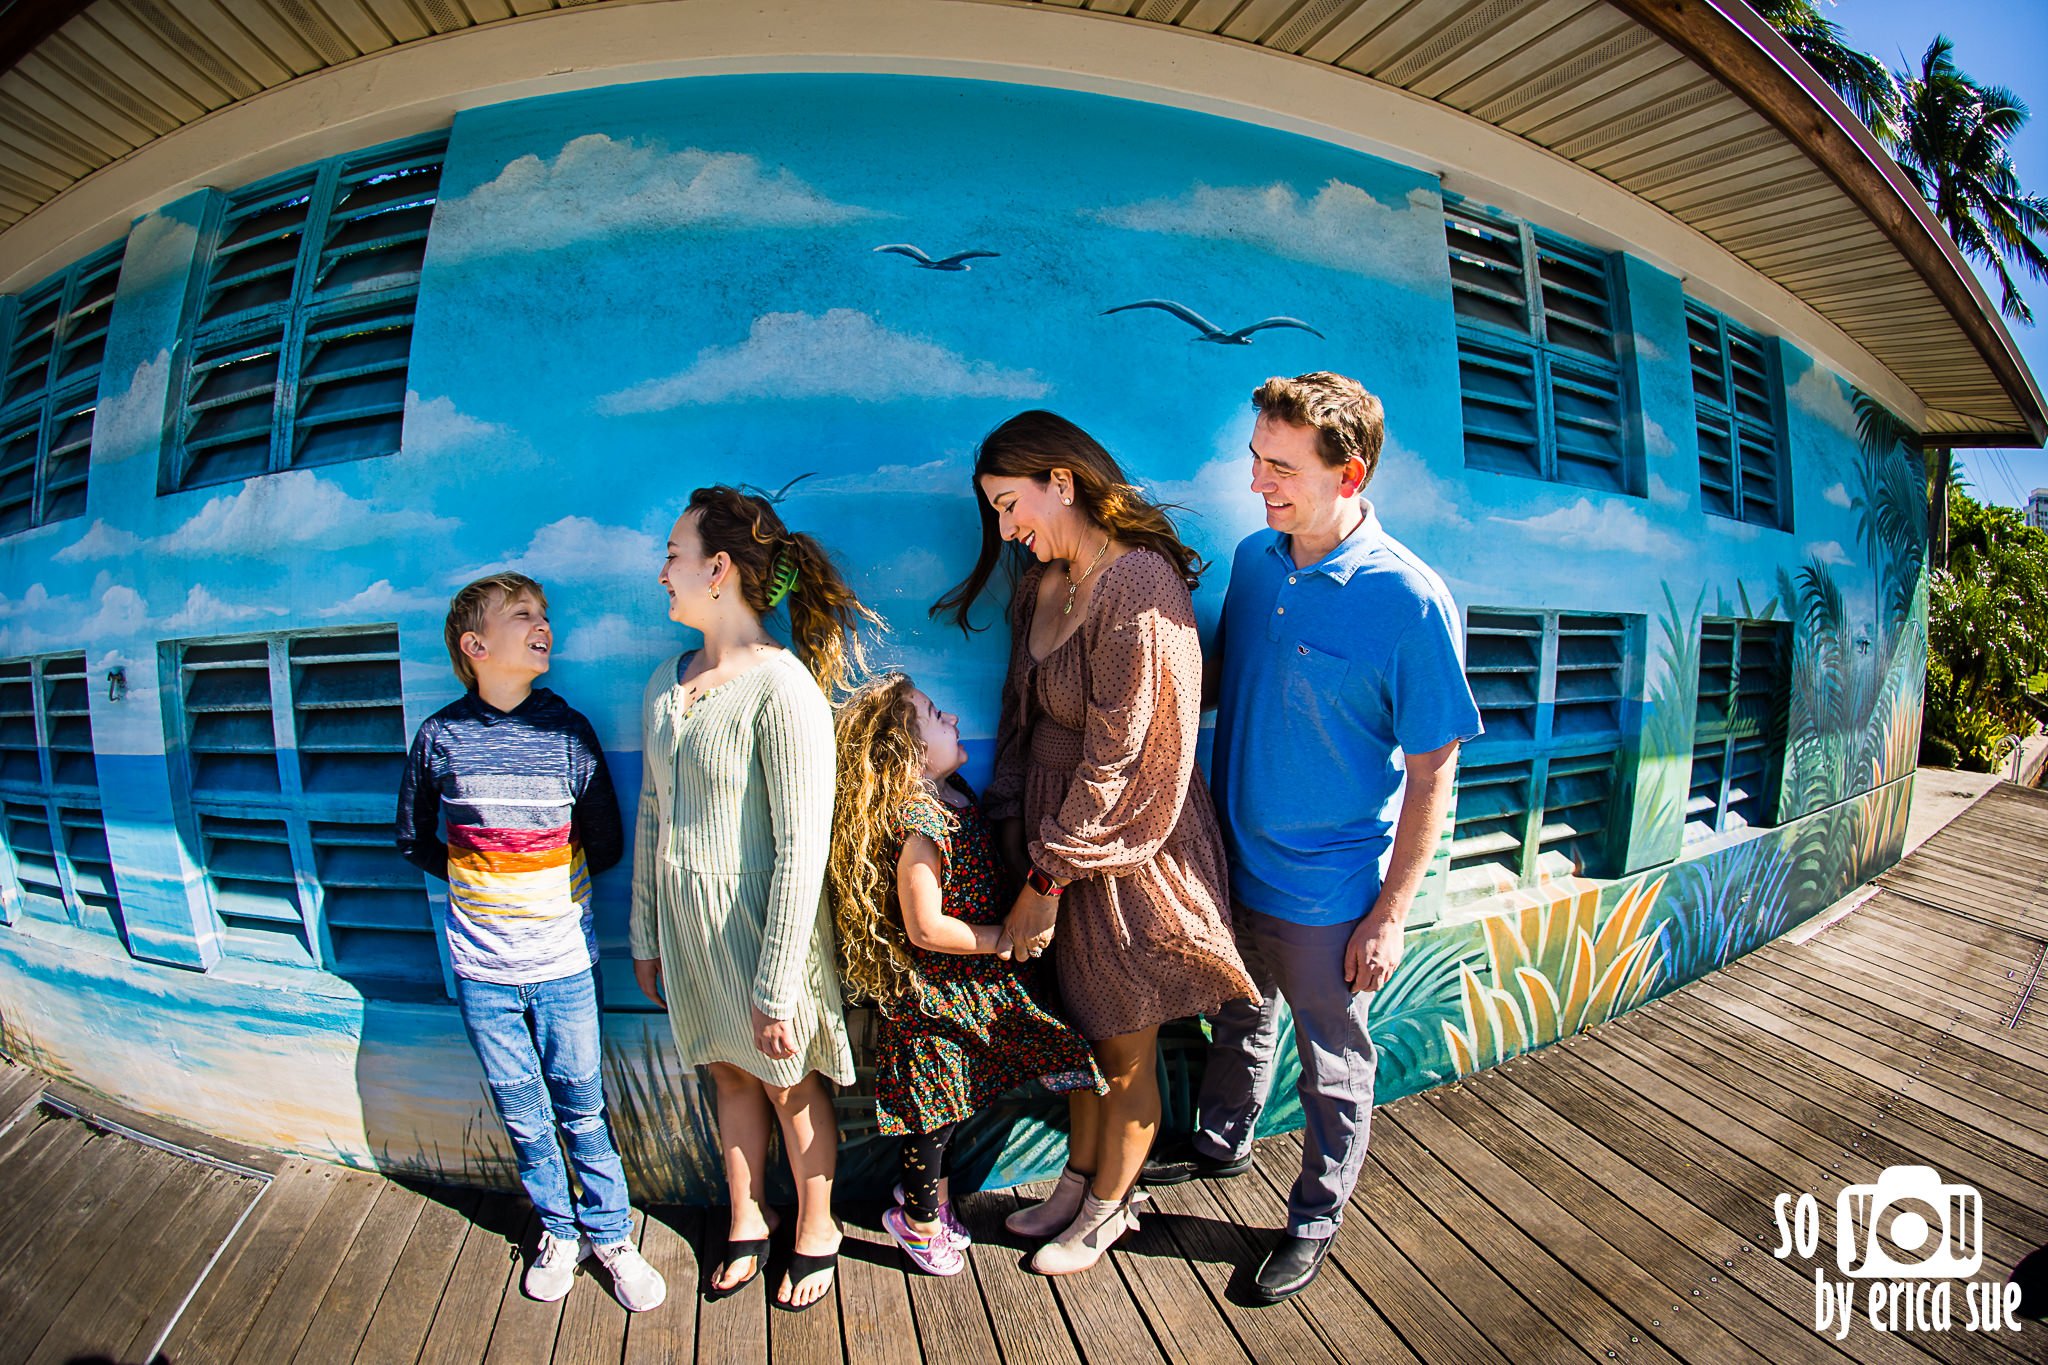 18-walters-lifestyle-family-photography-riverwalk-ft-lauderdale-so-you-by-erica-sue-CD8A5422-Edit.jpg